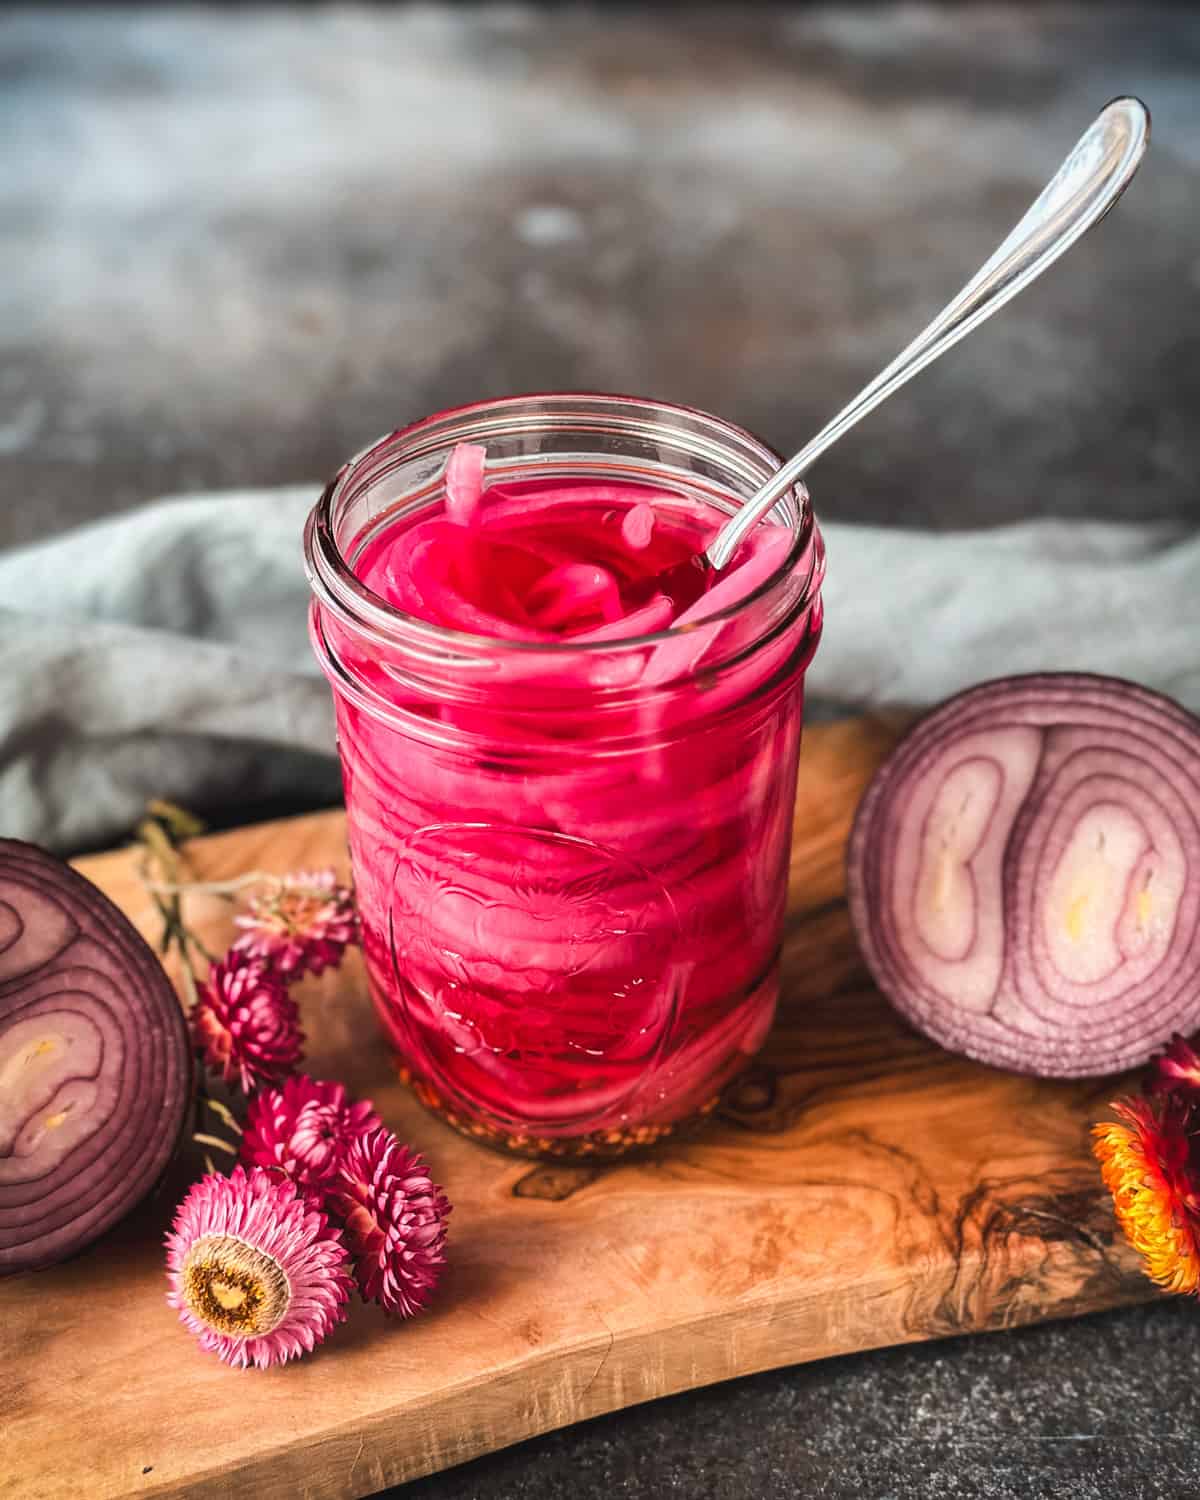 A jar of pickled red onions that are a beautiful bright pink color with a fork in it, on a wood cutting board surrounded by a cut onion and dried flowers.